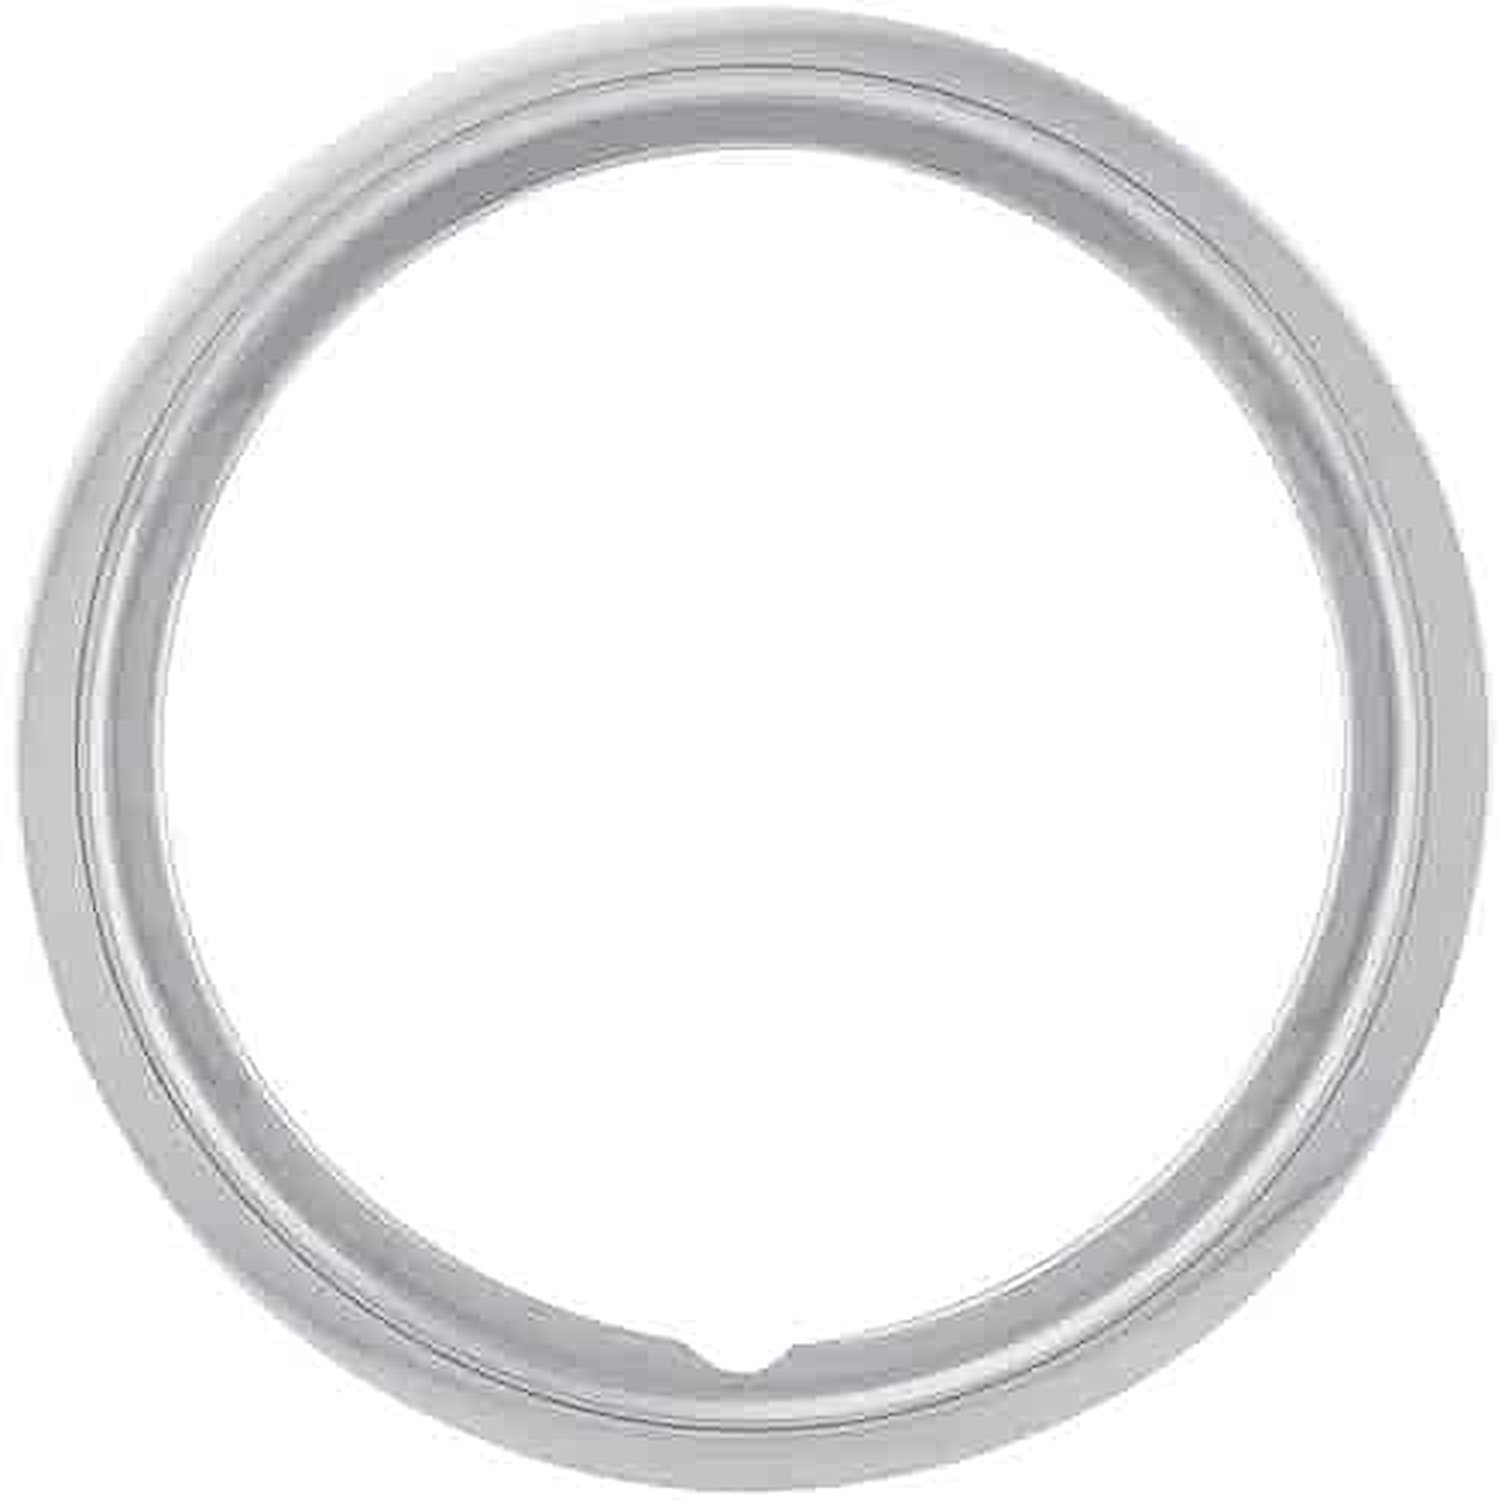 Stainless Steel Trim Ring 15